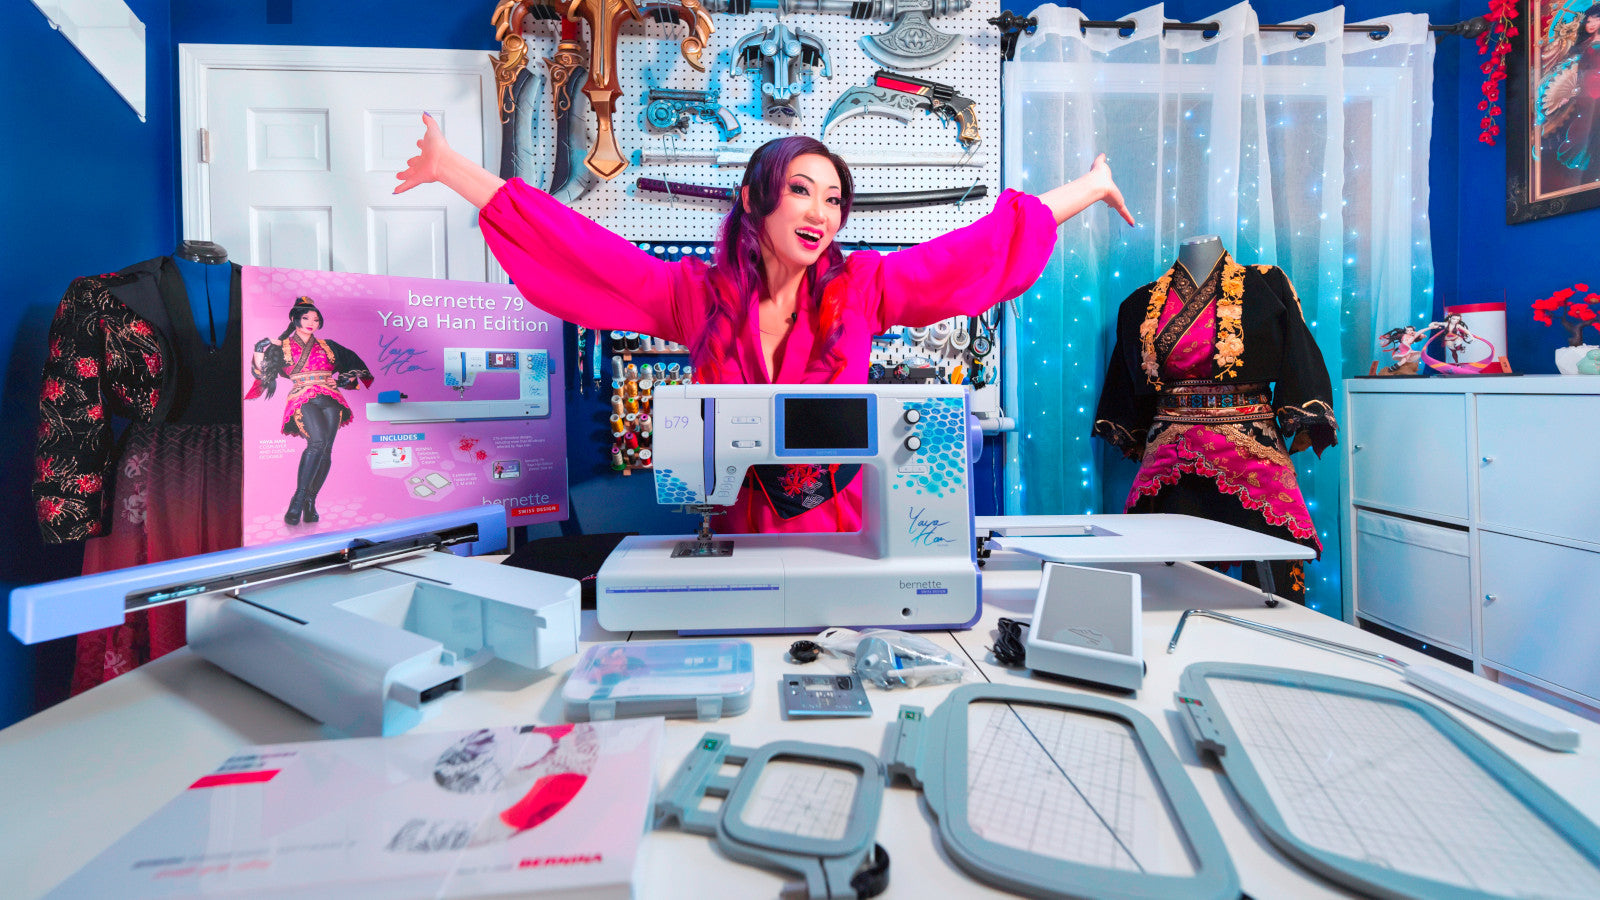 image of yaya han showing off the Bernette b79 Yaya Han Special Edition Sewing and Embroidery Machine in a room with various embroidery and cosplay supplies